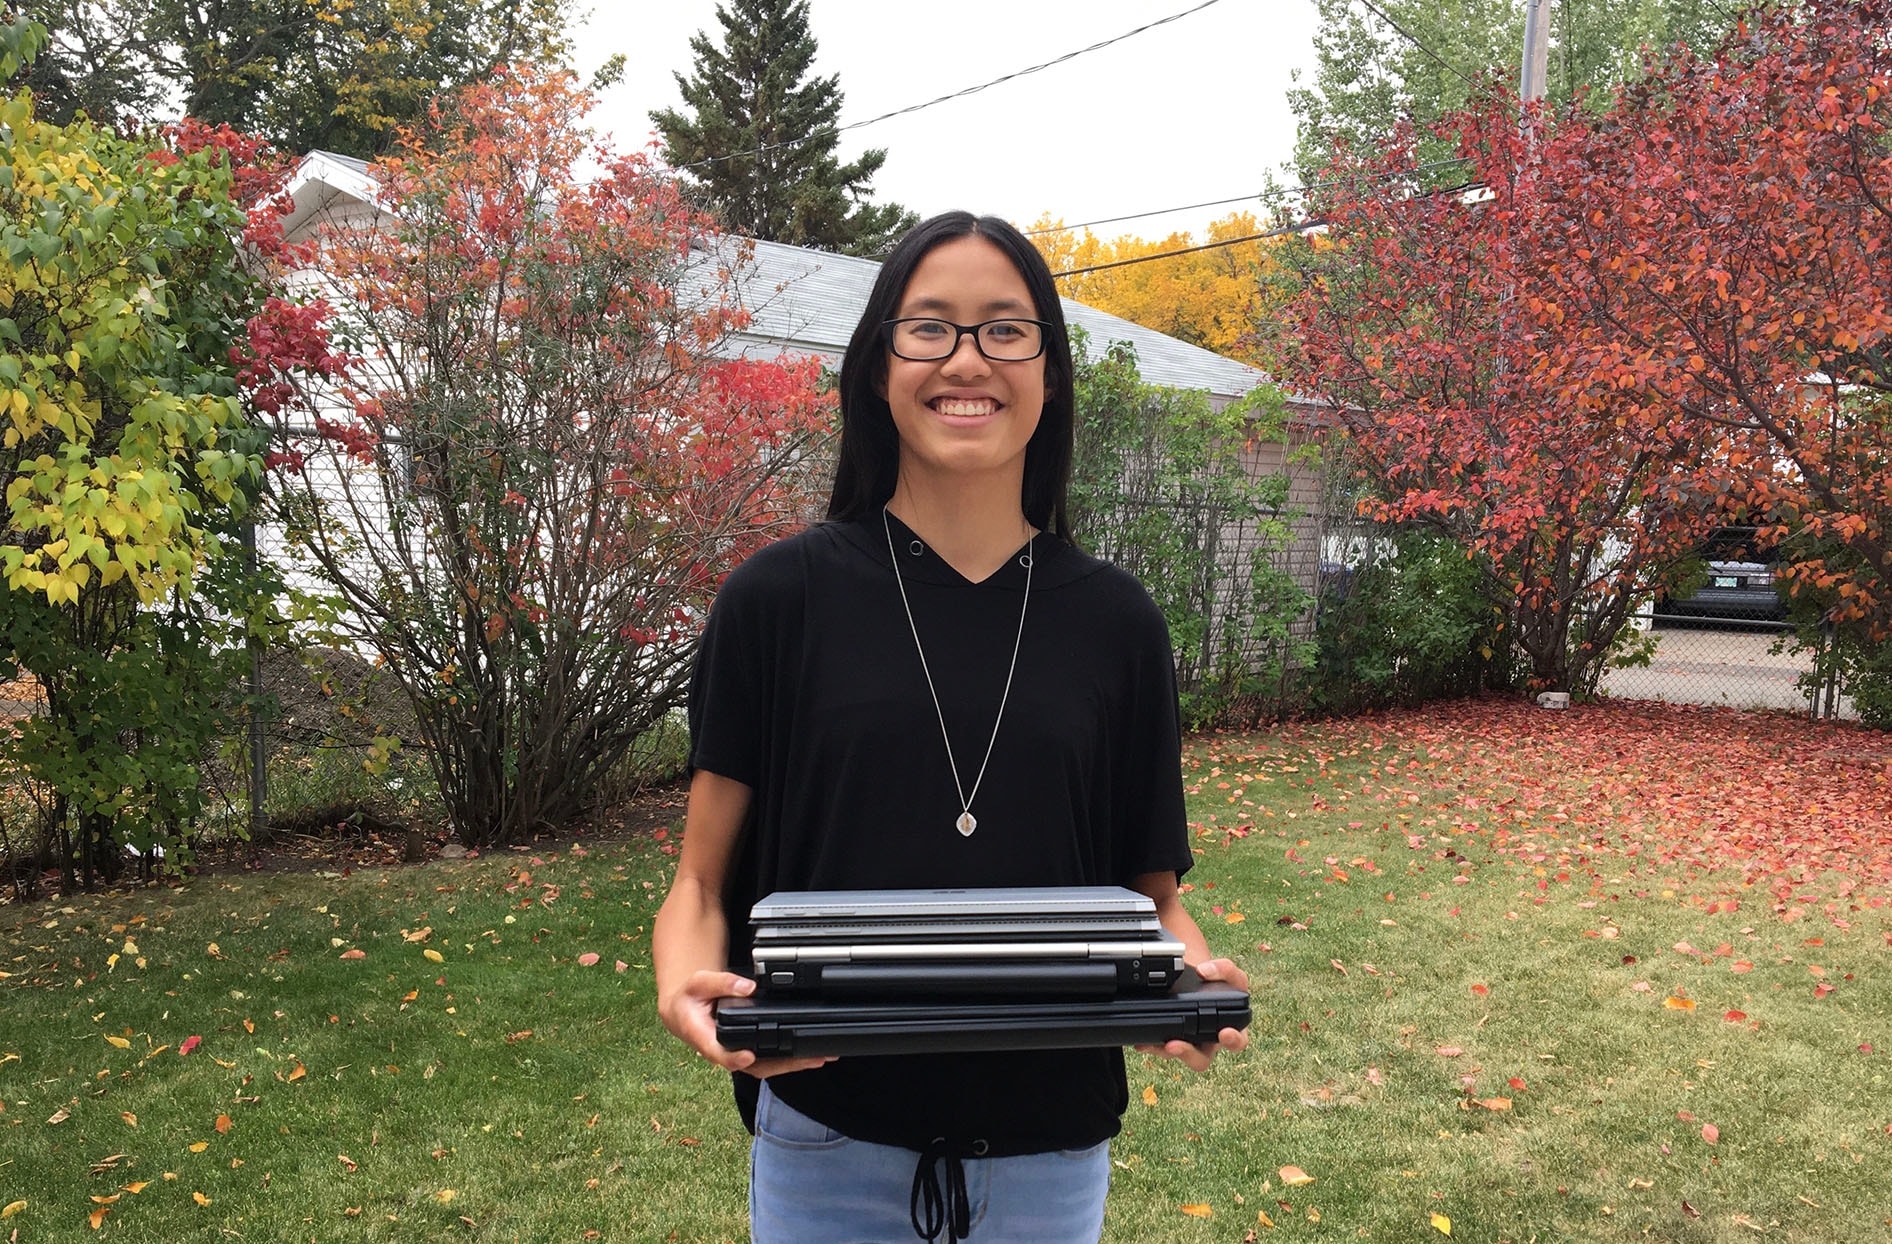 Emily smiles as she stands outside on the grass holding laptops in her hands